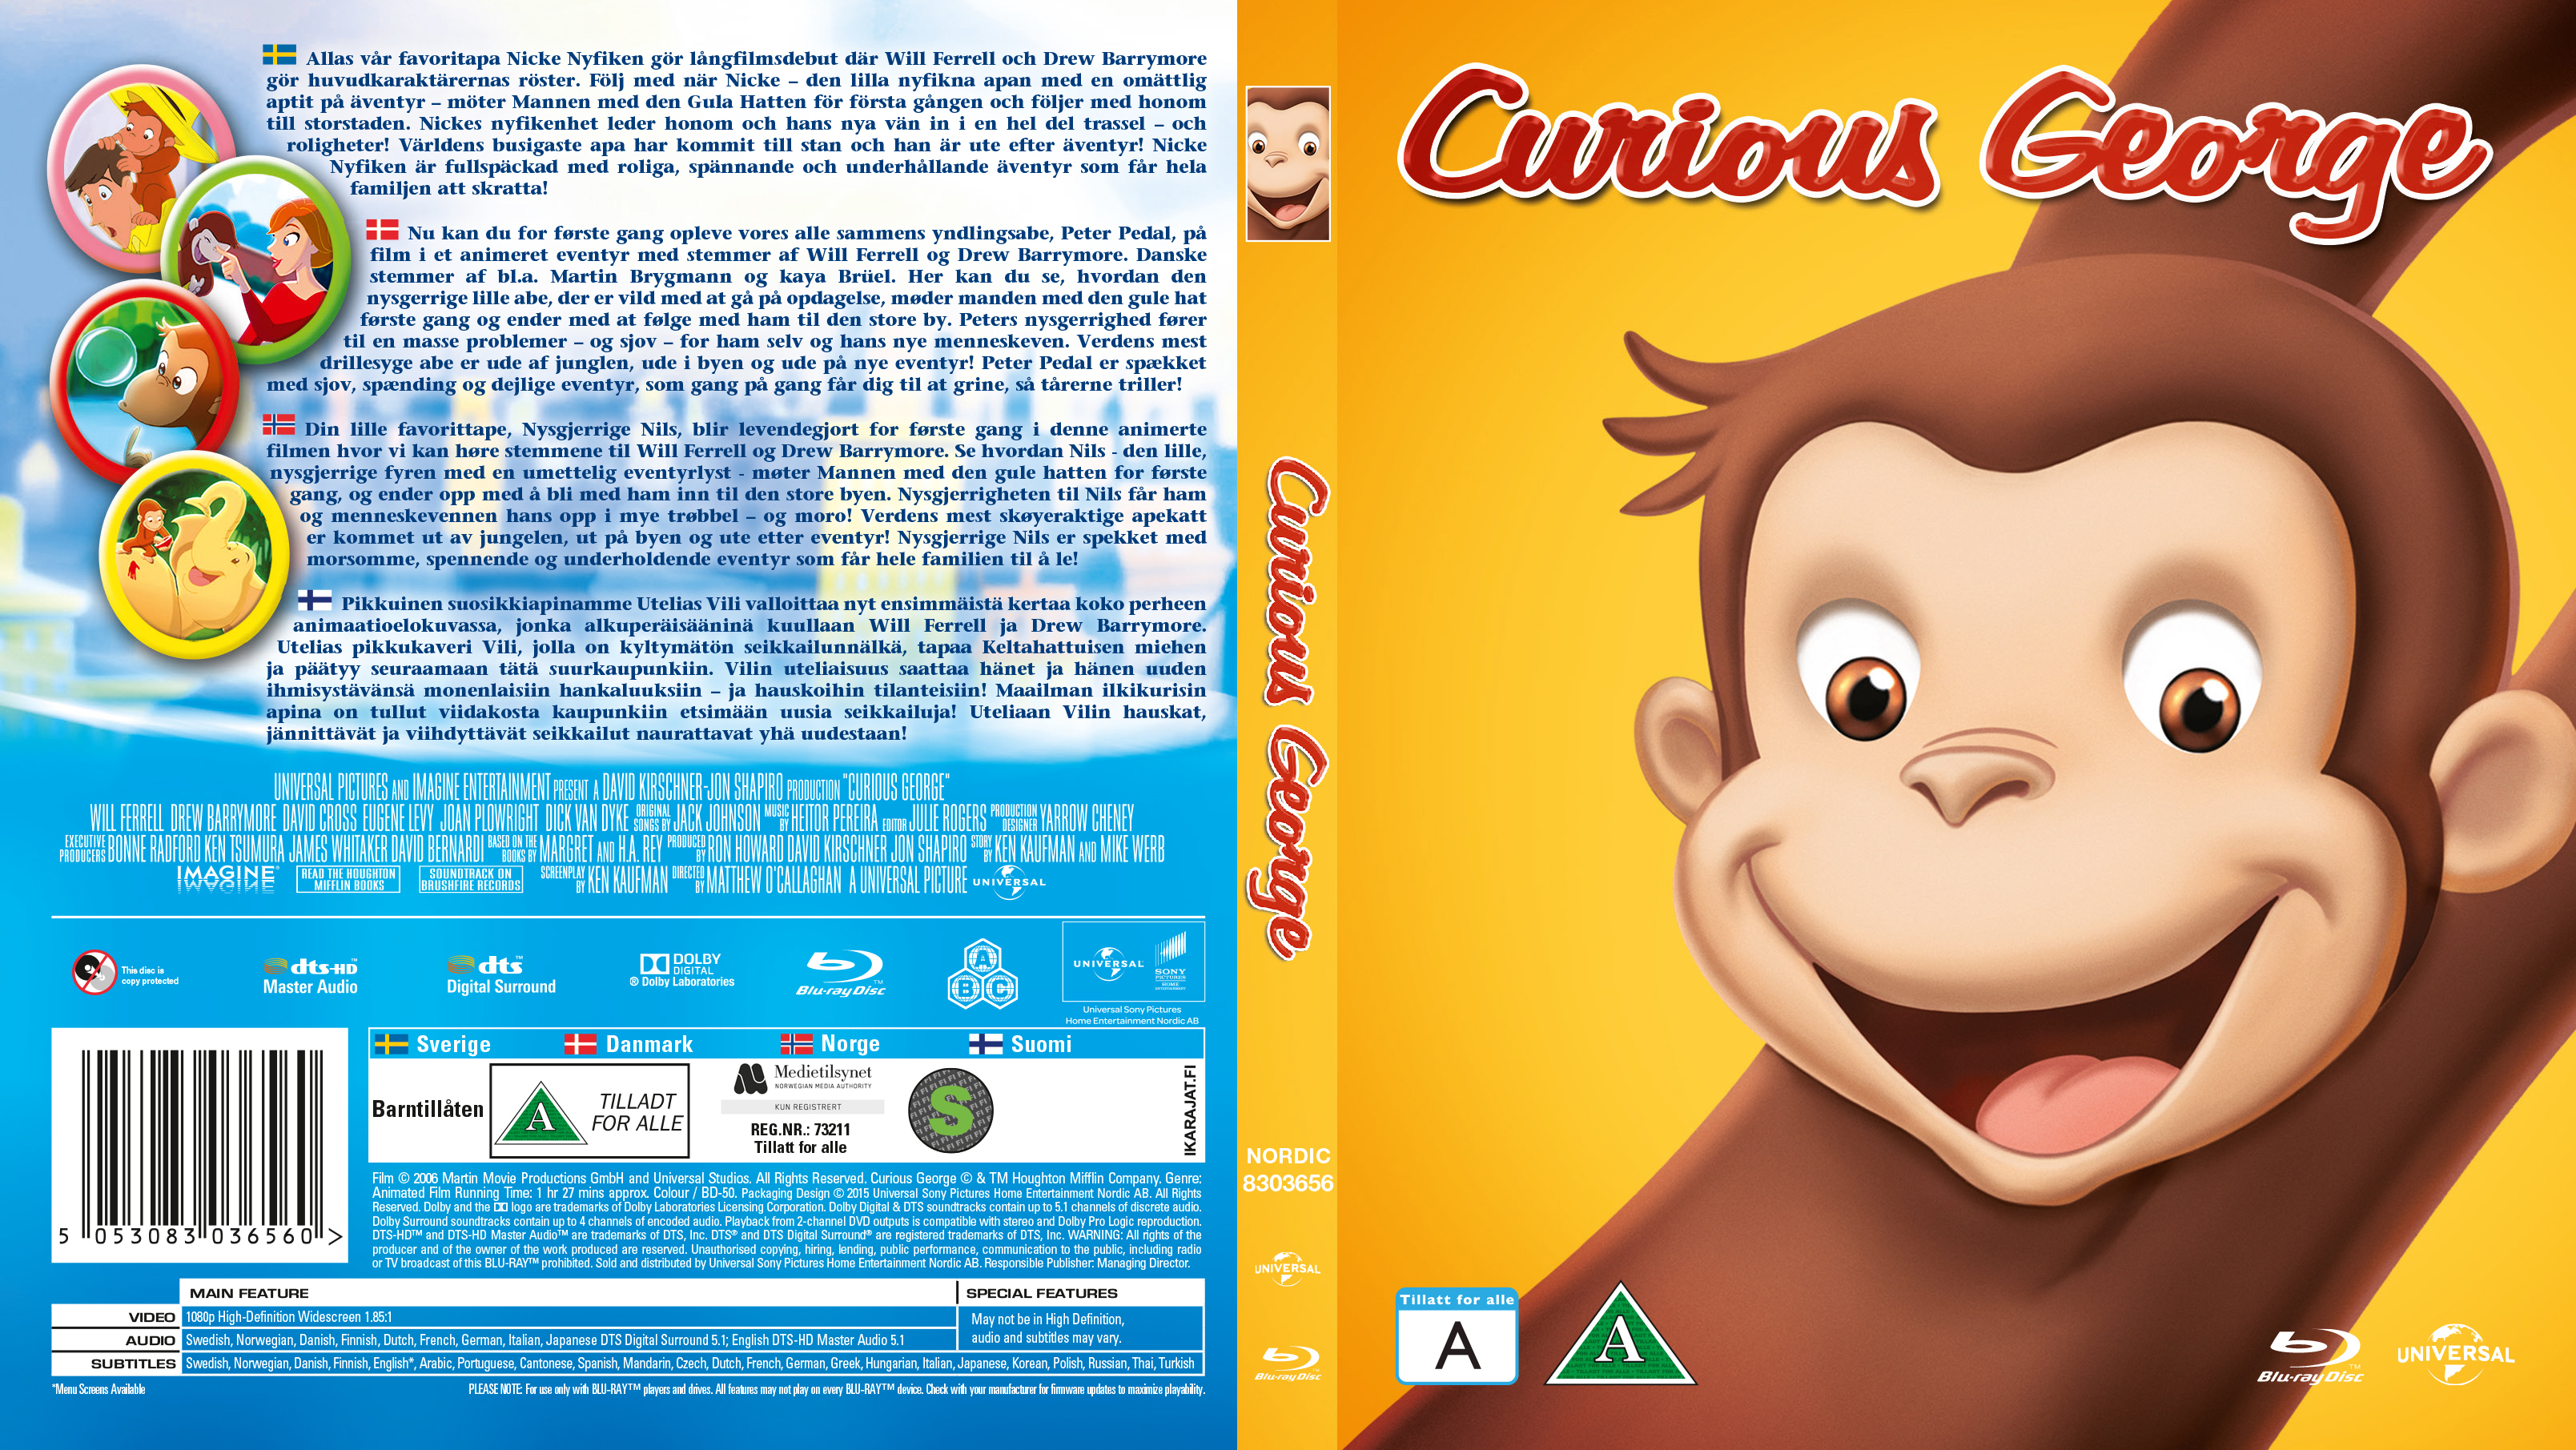 Opening to curious george dvd